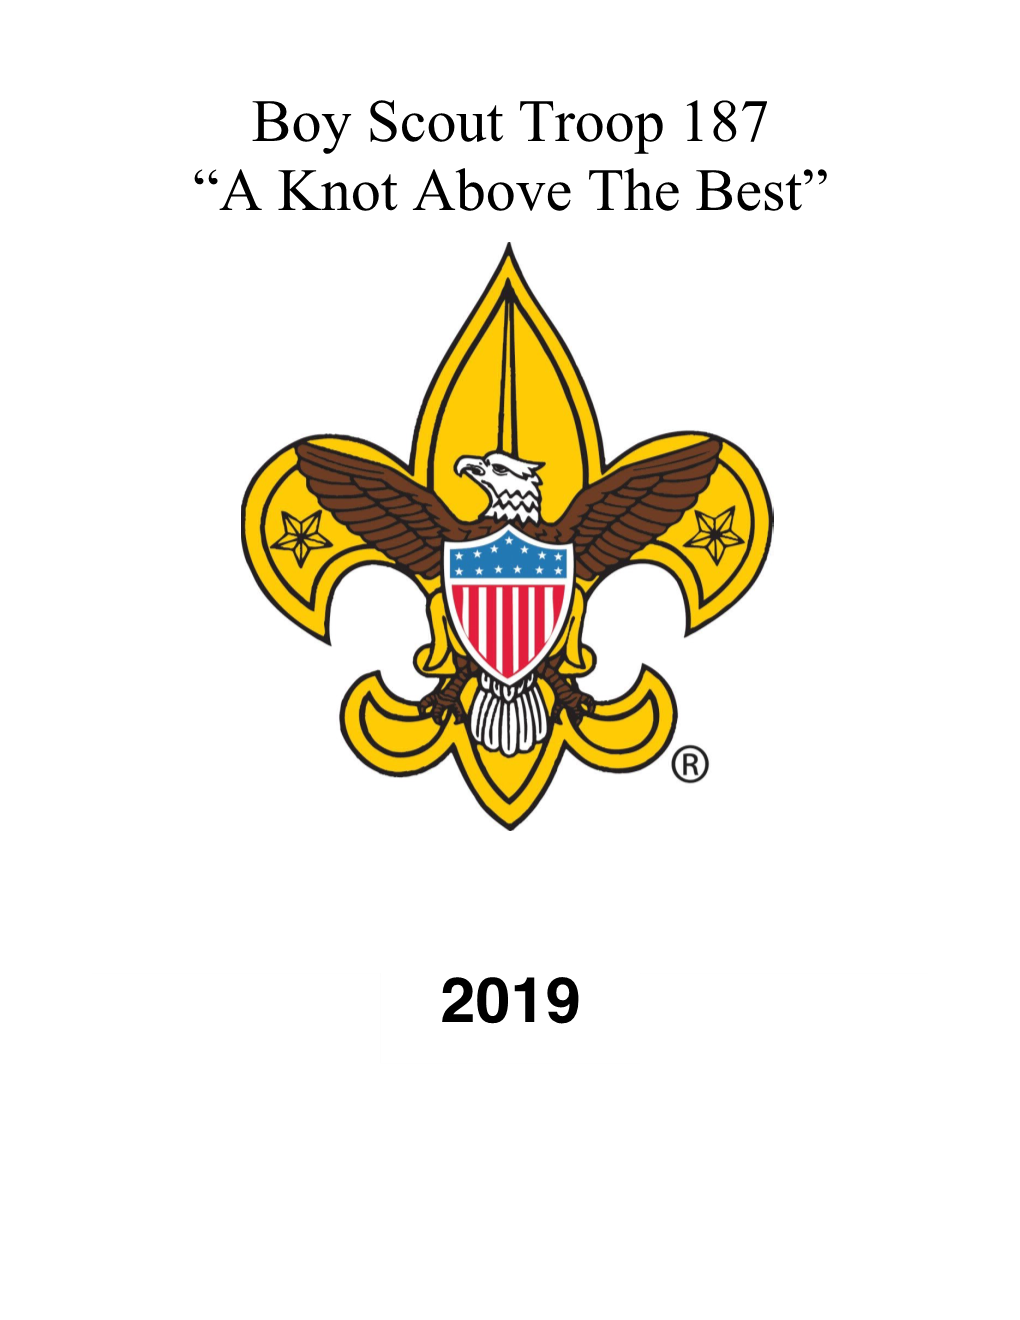 Boy Scout Troop 187 “A Knot Above the Best” 2018